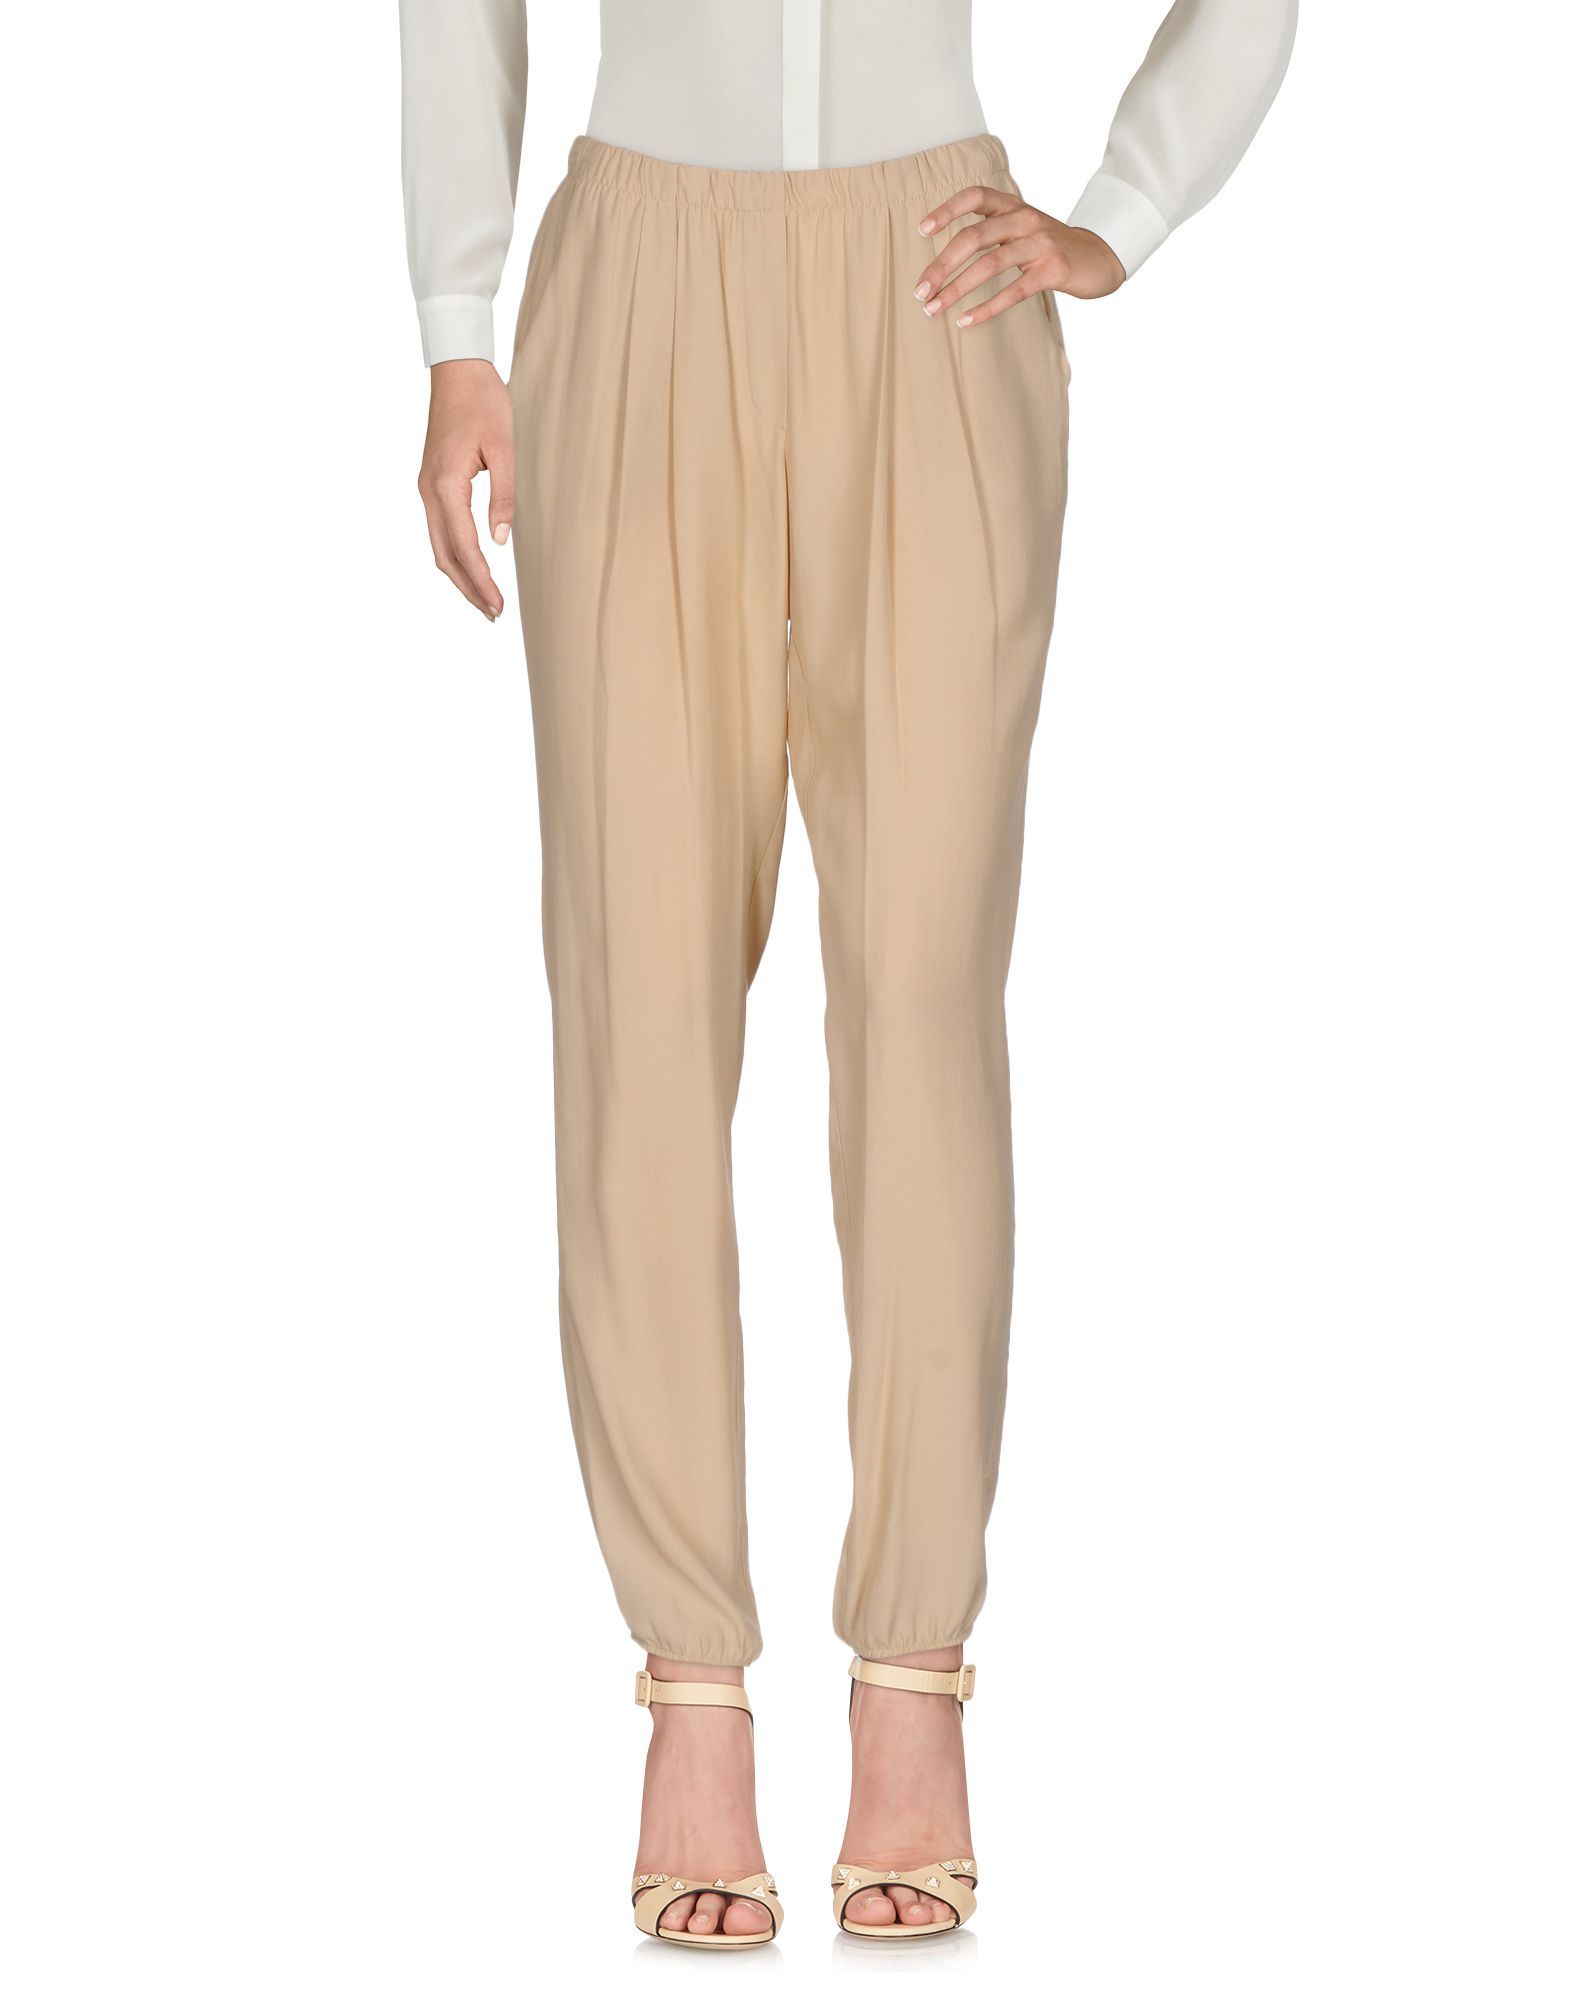 crêpe, no appliqués, solid colour, mid rise, comfort fit, tapered leg, elasticised waist, multipockets, with elastic bottom, pants